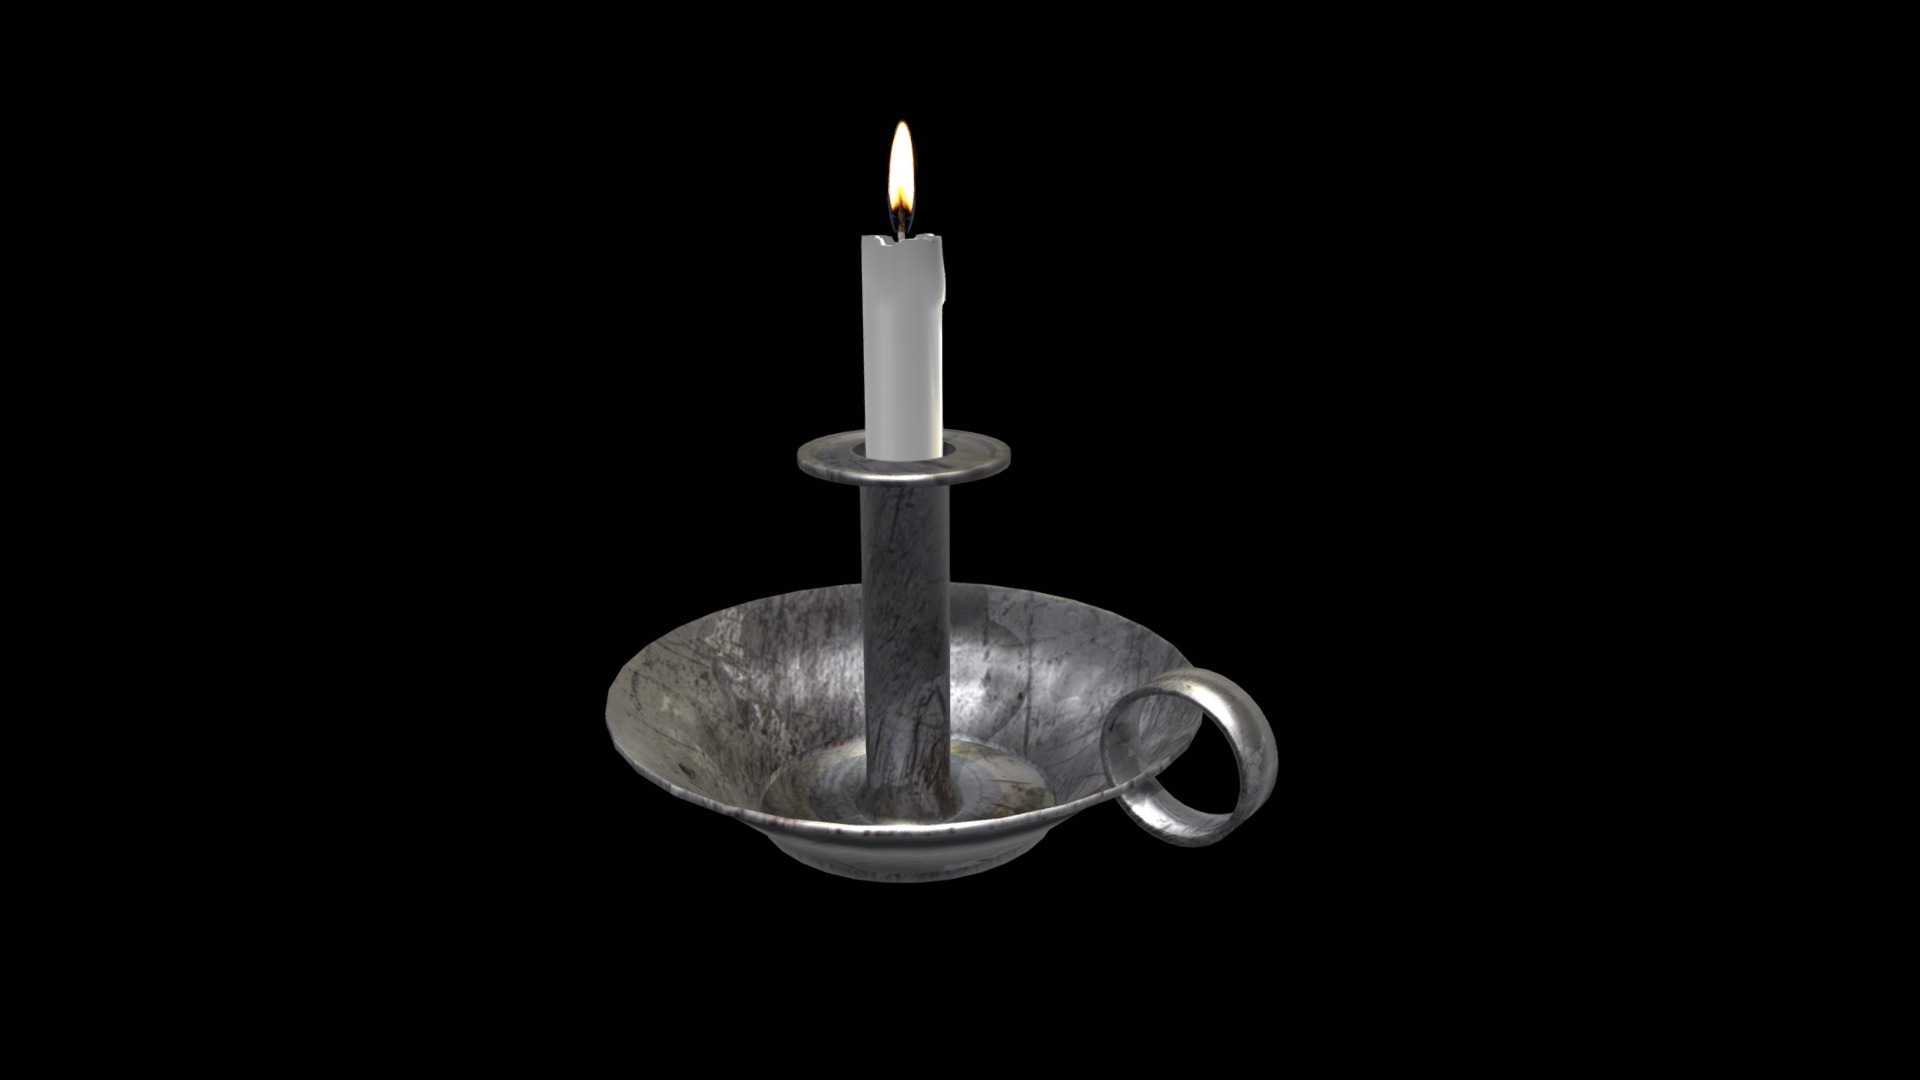 3D model Candle Holder - This is a 3D model of the Candle Holder. The 3D model is about a lit candle in a glass holder.